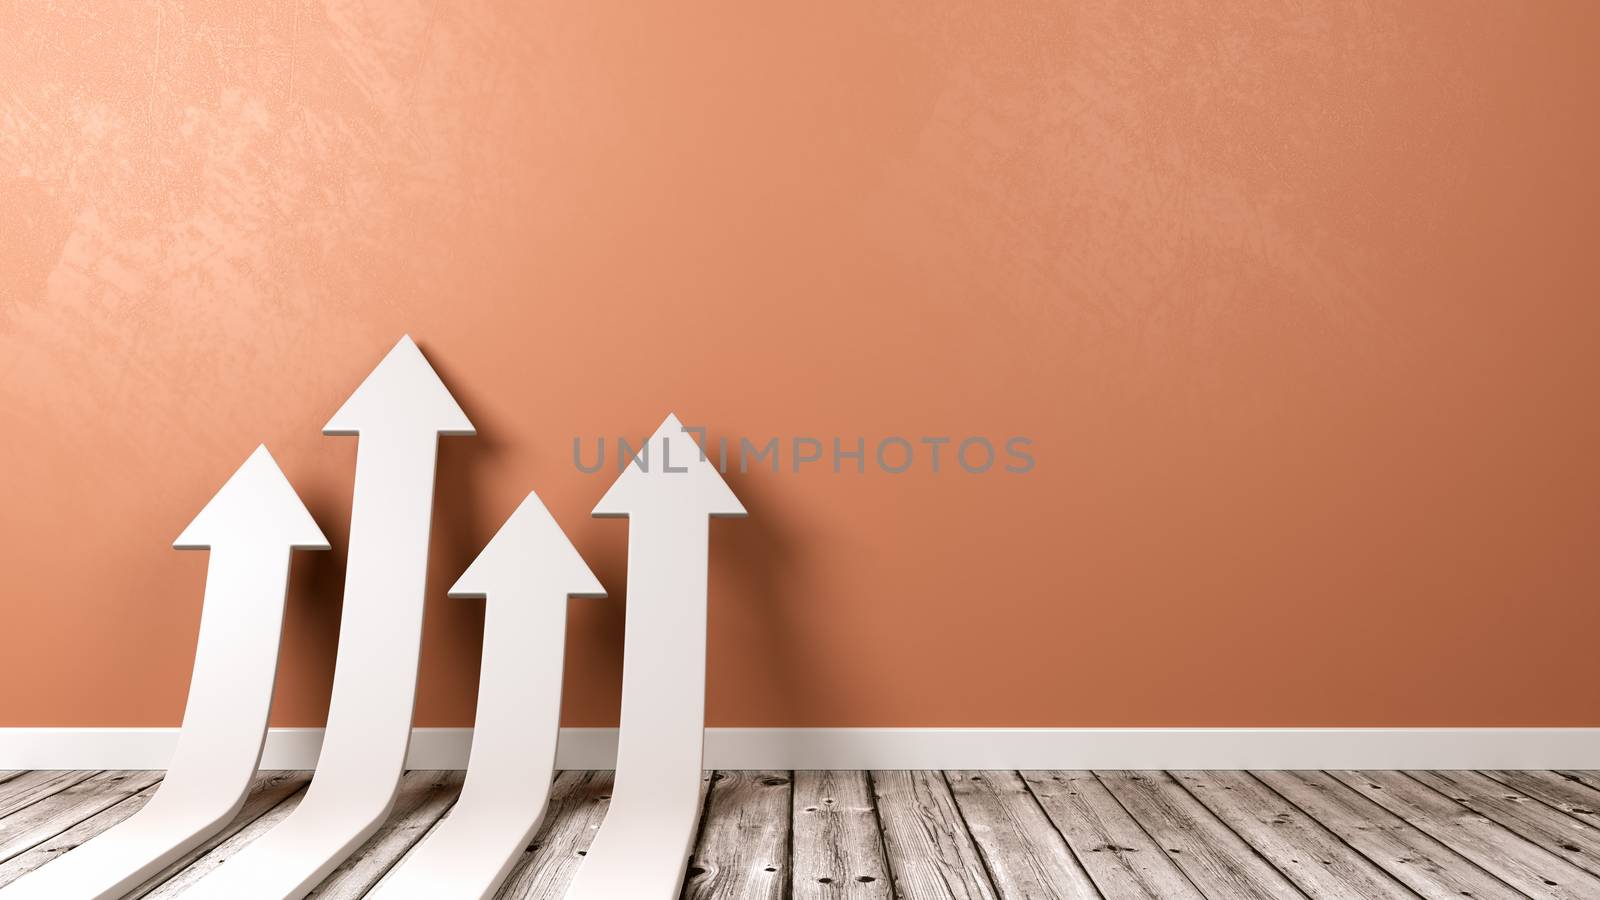 Four White Arrows Shape Lift Off on Wooden Floor Against Orange Wall with Copyspace 3D Illustration